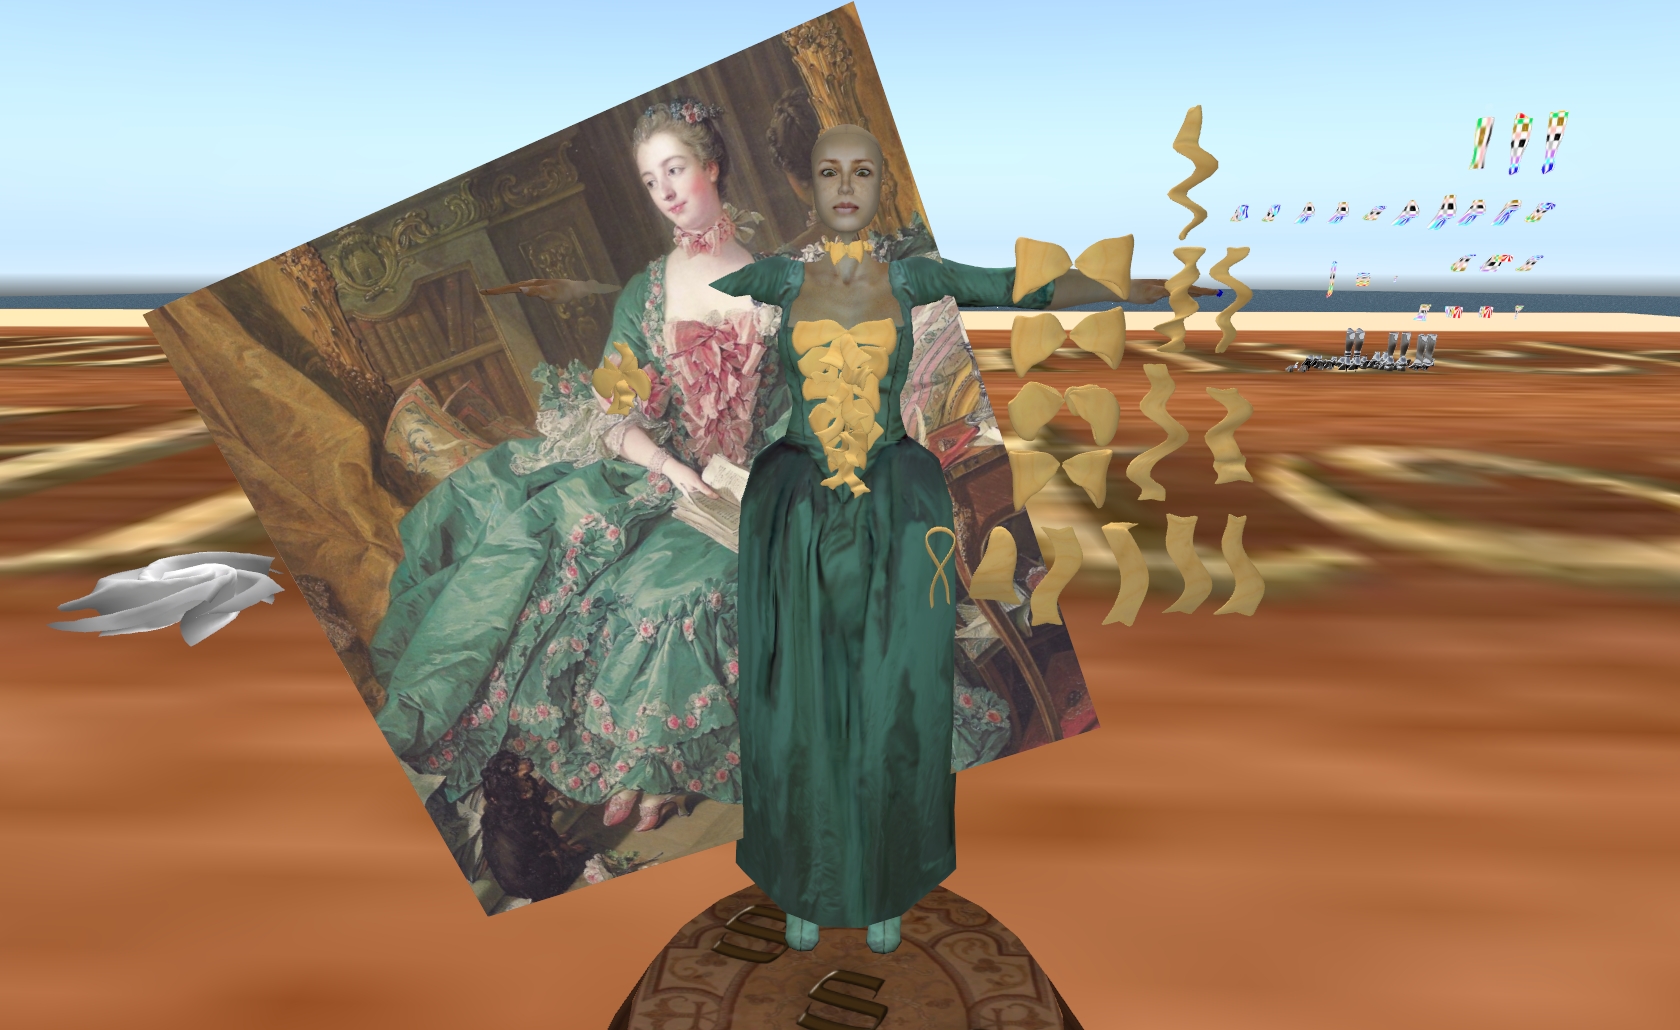 a digital - art scene shows a woman in costume and a painting on a table